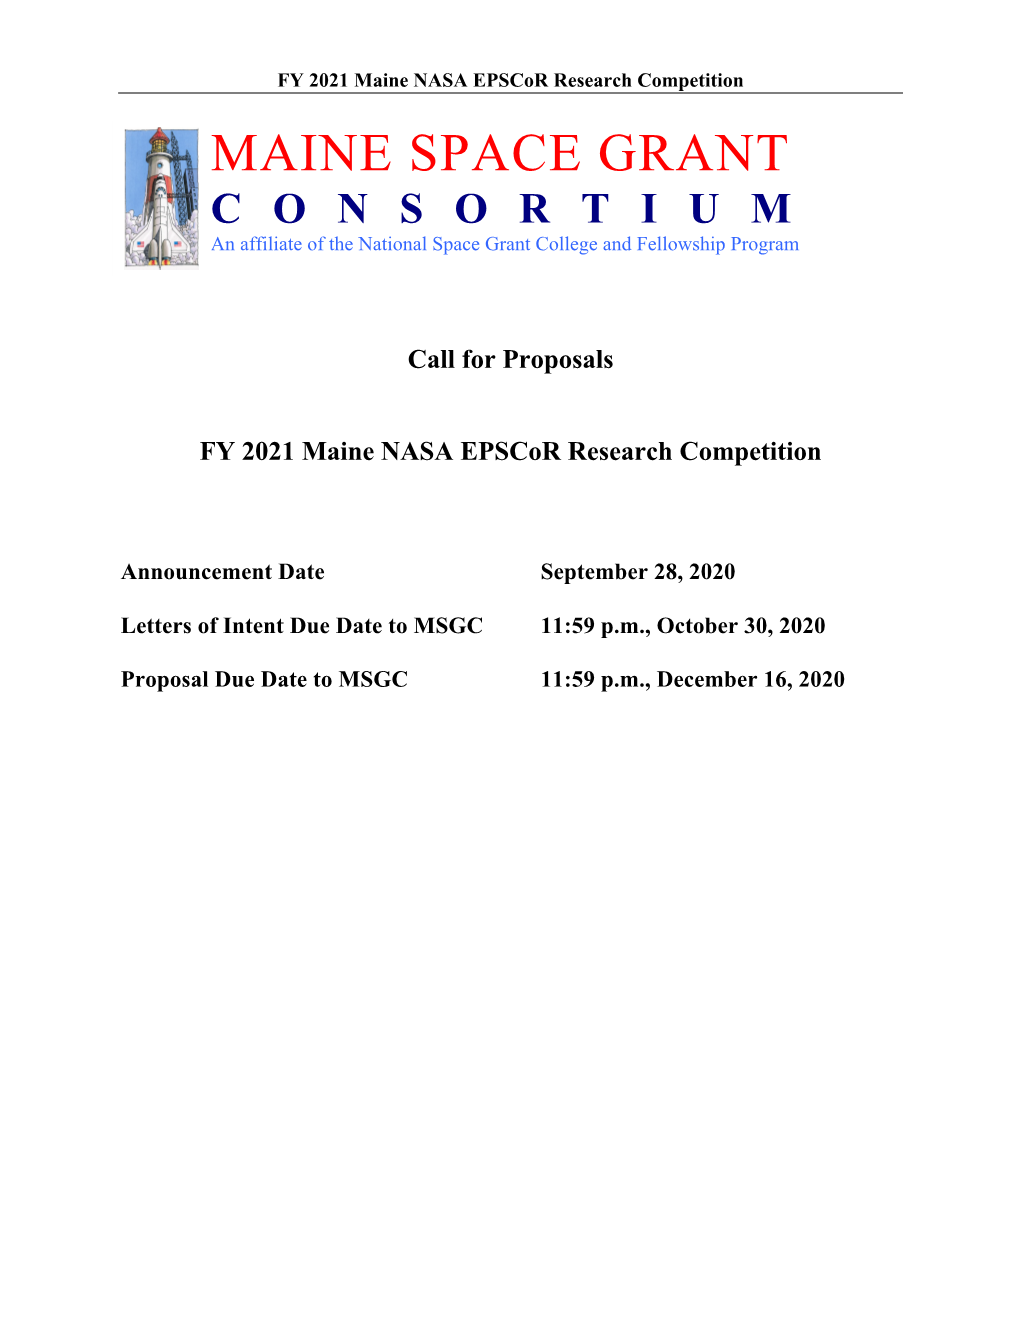 FINAL Maine NASA Epscor Research FY21 Competition Call